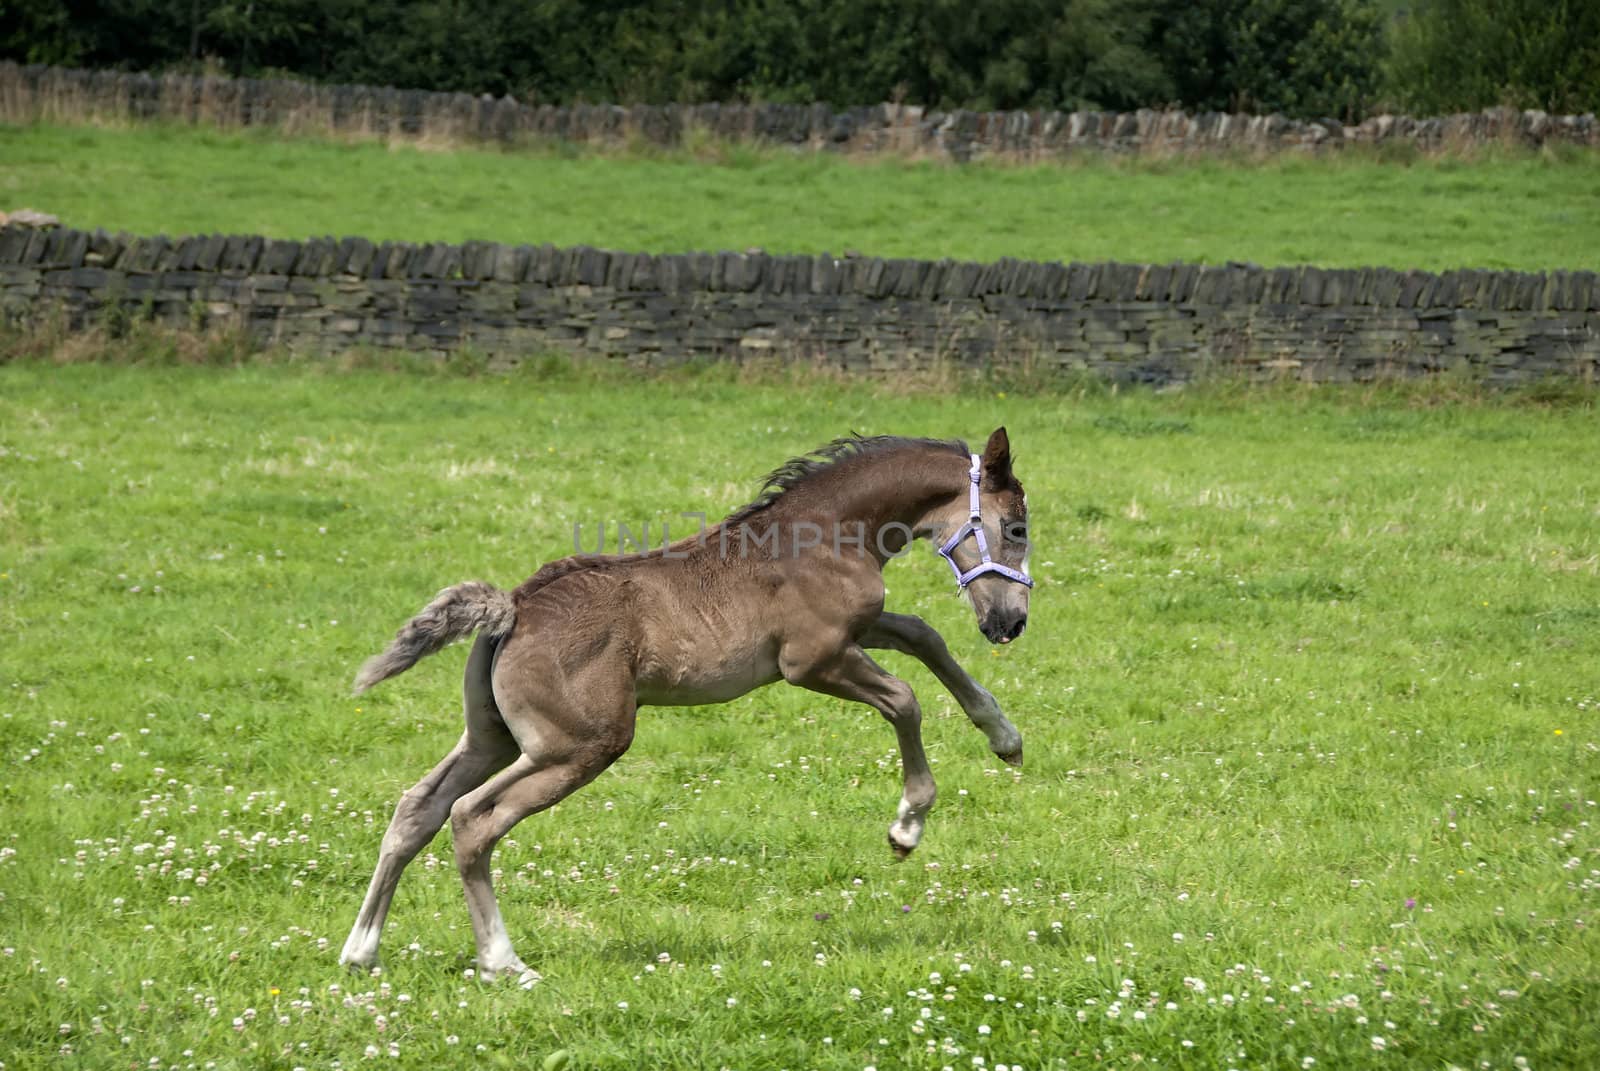 Prancing Foal by d40xboy